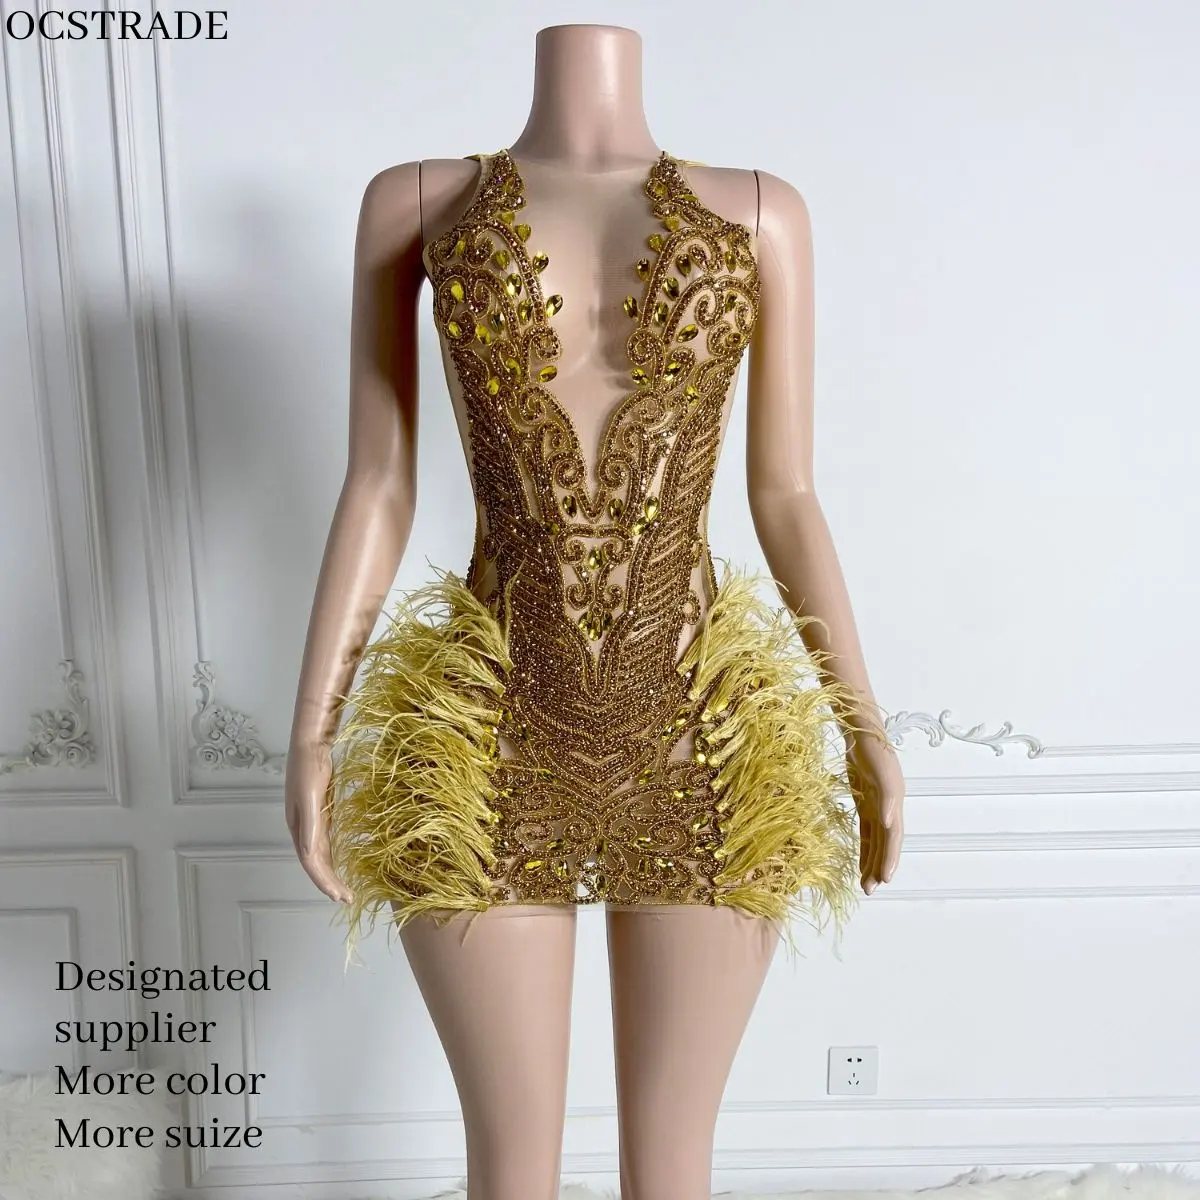 Ocstrade Summer Mesh Feather Party Style Women'S Fashion Dress Strapless Sequin Sparkly Short Gold Diamond Club Dress For Woman